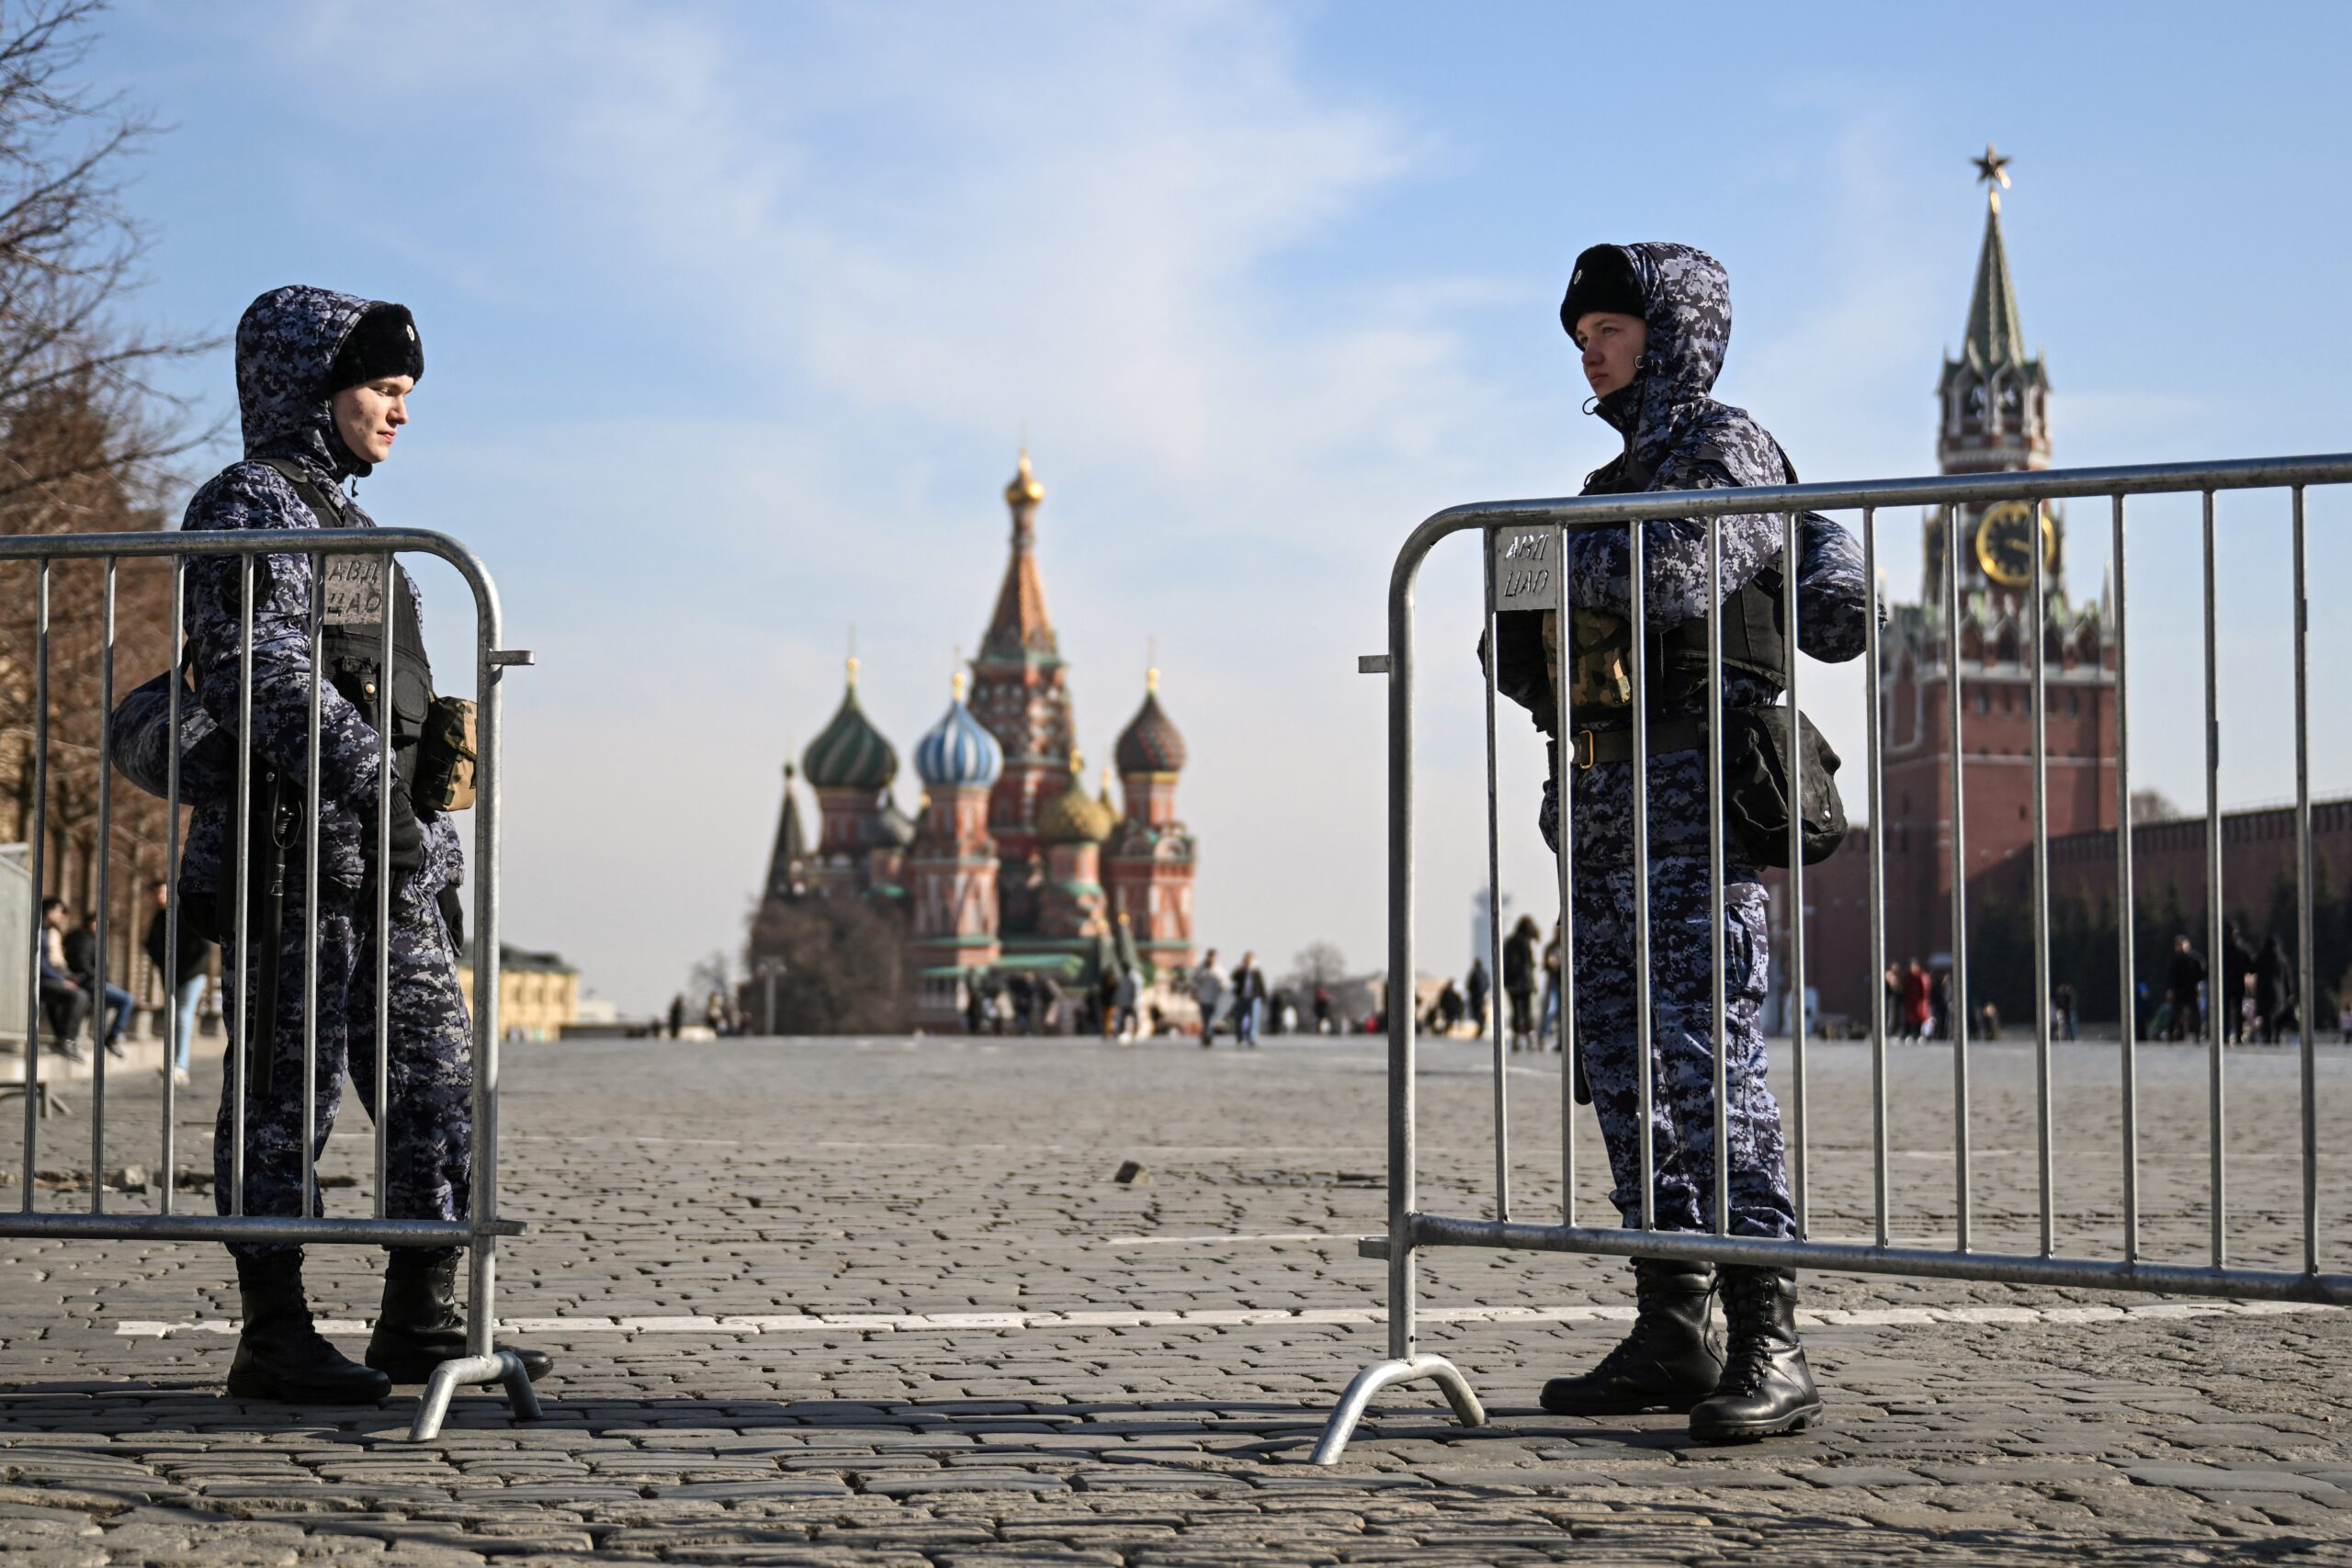 RUSSIA-ATTACK-SECURITY-TOURISM